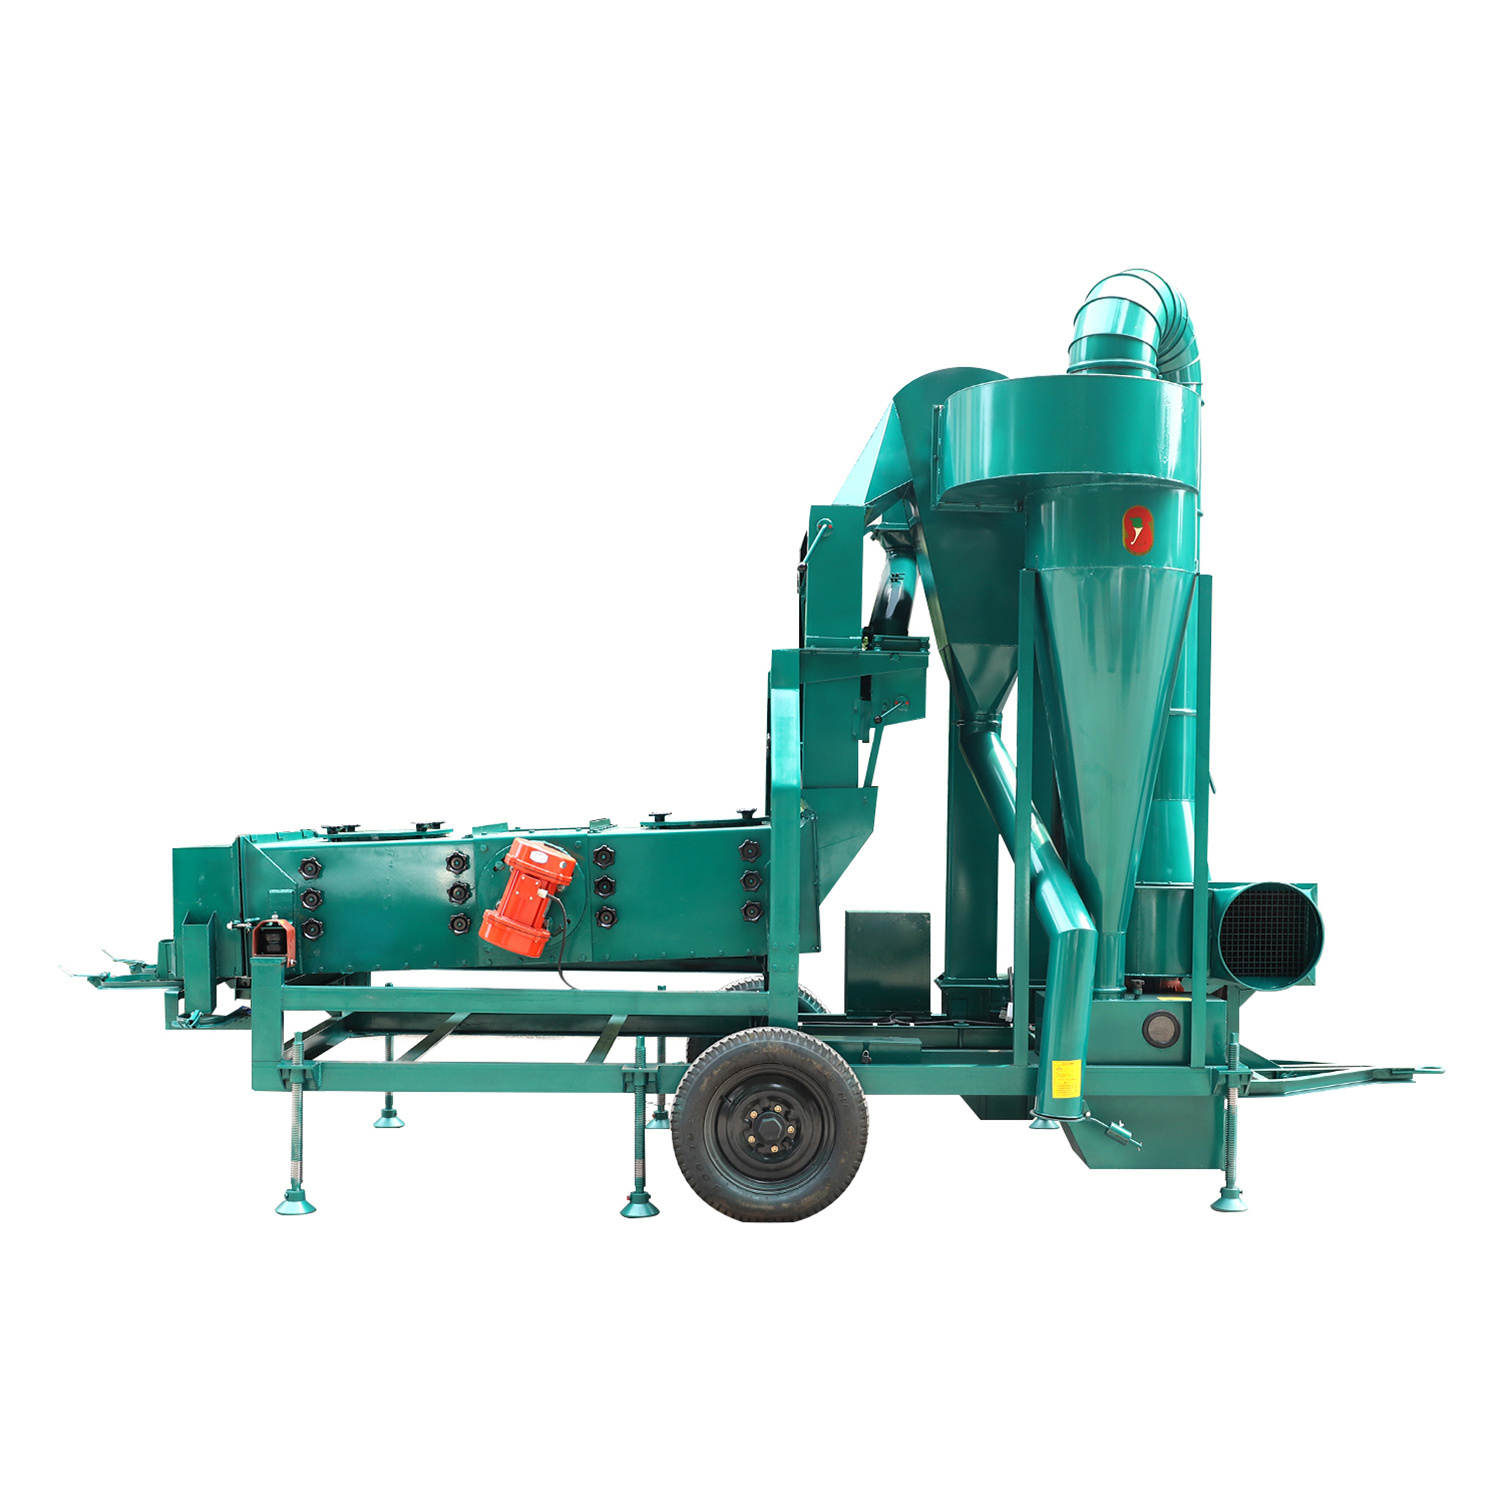 Grain Seed Cleaning and Grading Machine with Capacity 15t/H